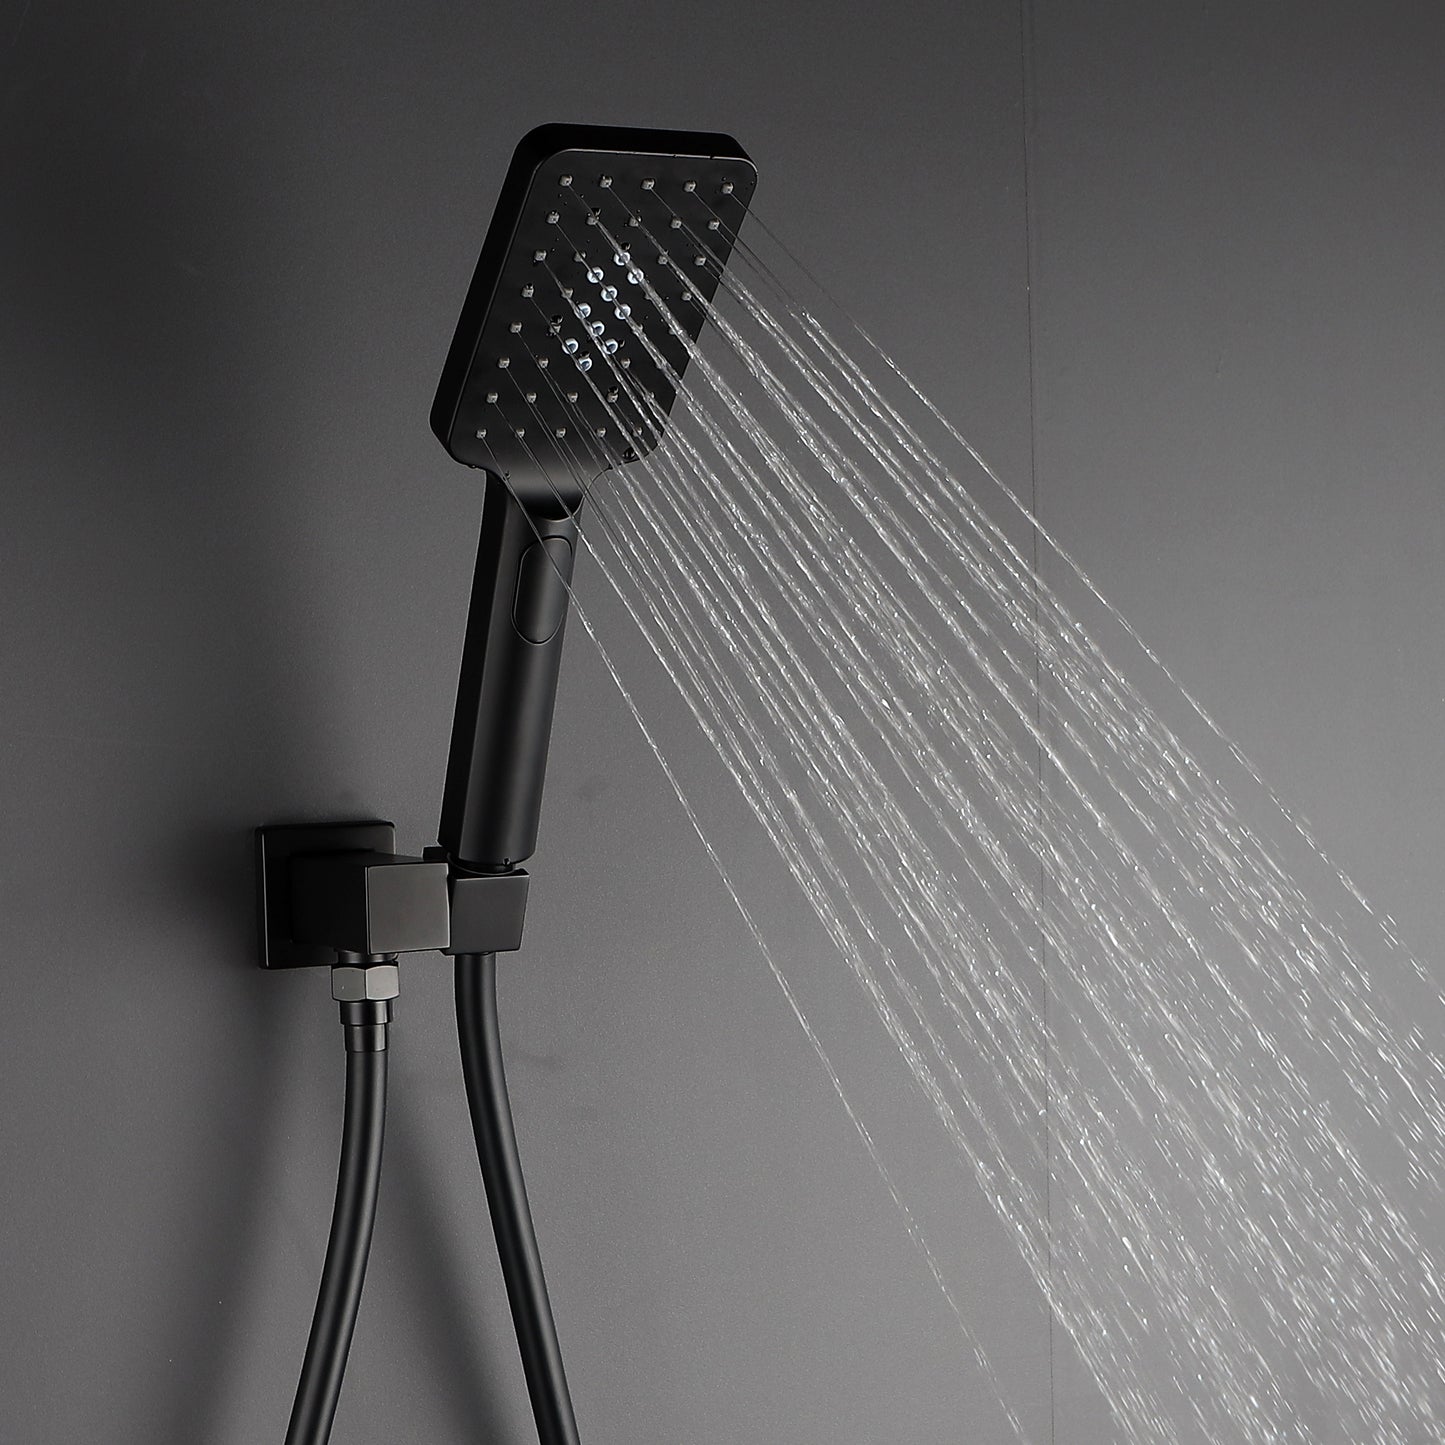 Shower Faucet Set Anti-scald Shower Fixtures with Rough-in Pressure Balanced Valve and Embedded Box, Wall Mounted Rain Shower System